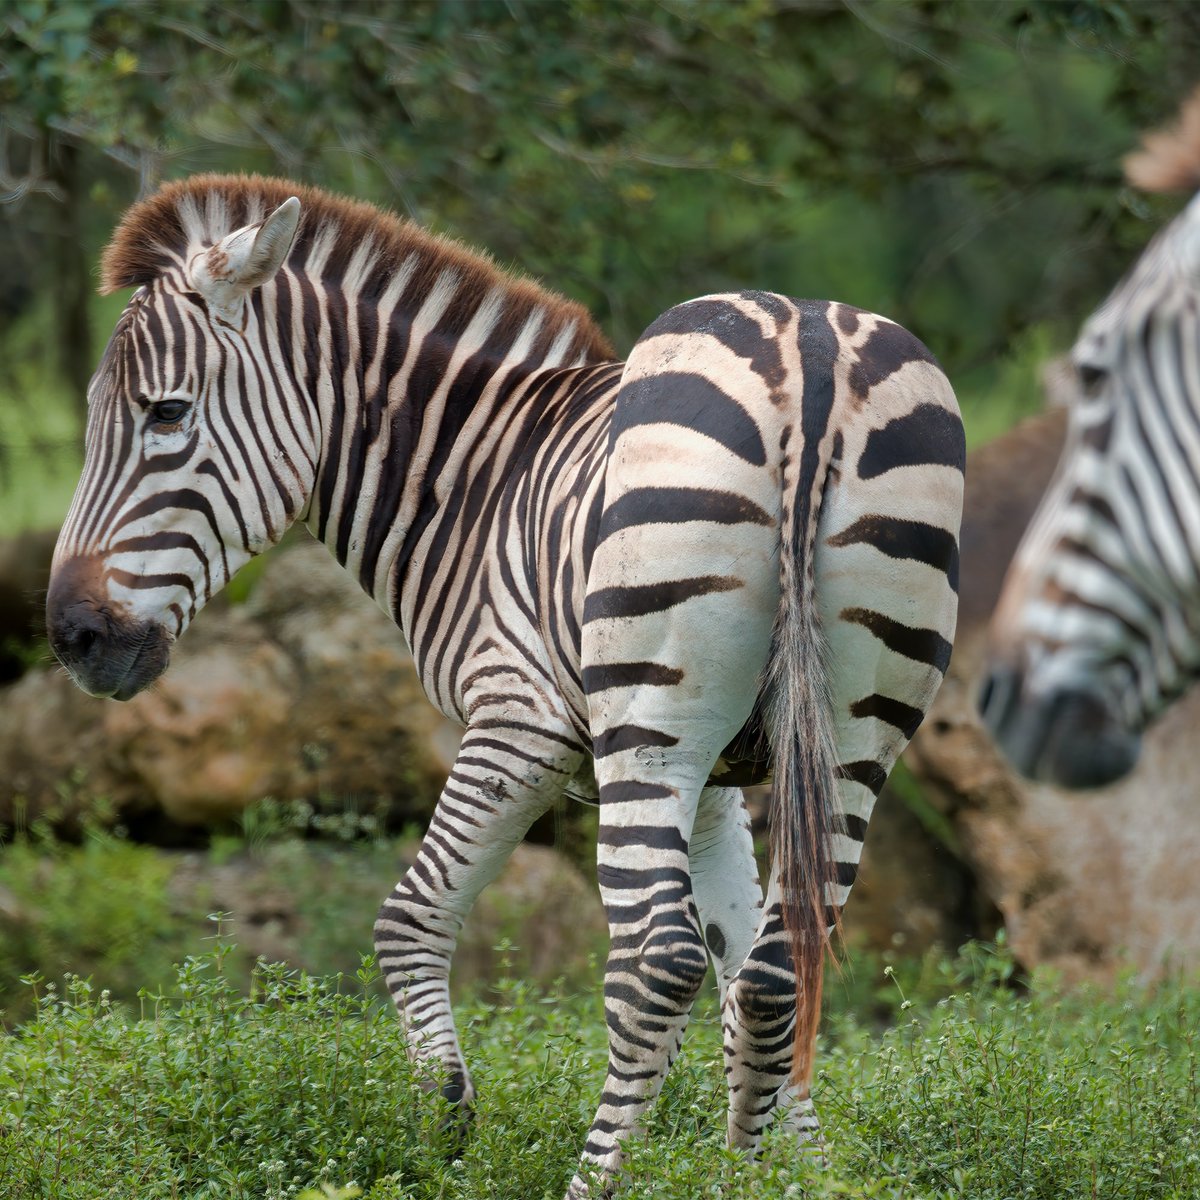 Happy #WorldZebraDay guys! With their instantly recognisable stripes these stunning animals are icons of the natural world, let's not allow them to fade away. 
#Zebra #Wildlife #Biodiversity #Nature #Ecosystems #Africa #Habitat #ZebraDay #Iconic #Beautiful #Conservation